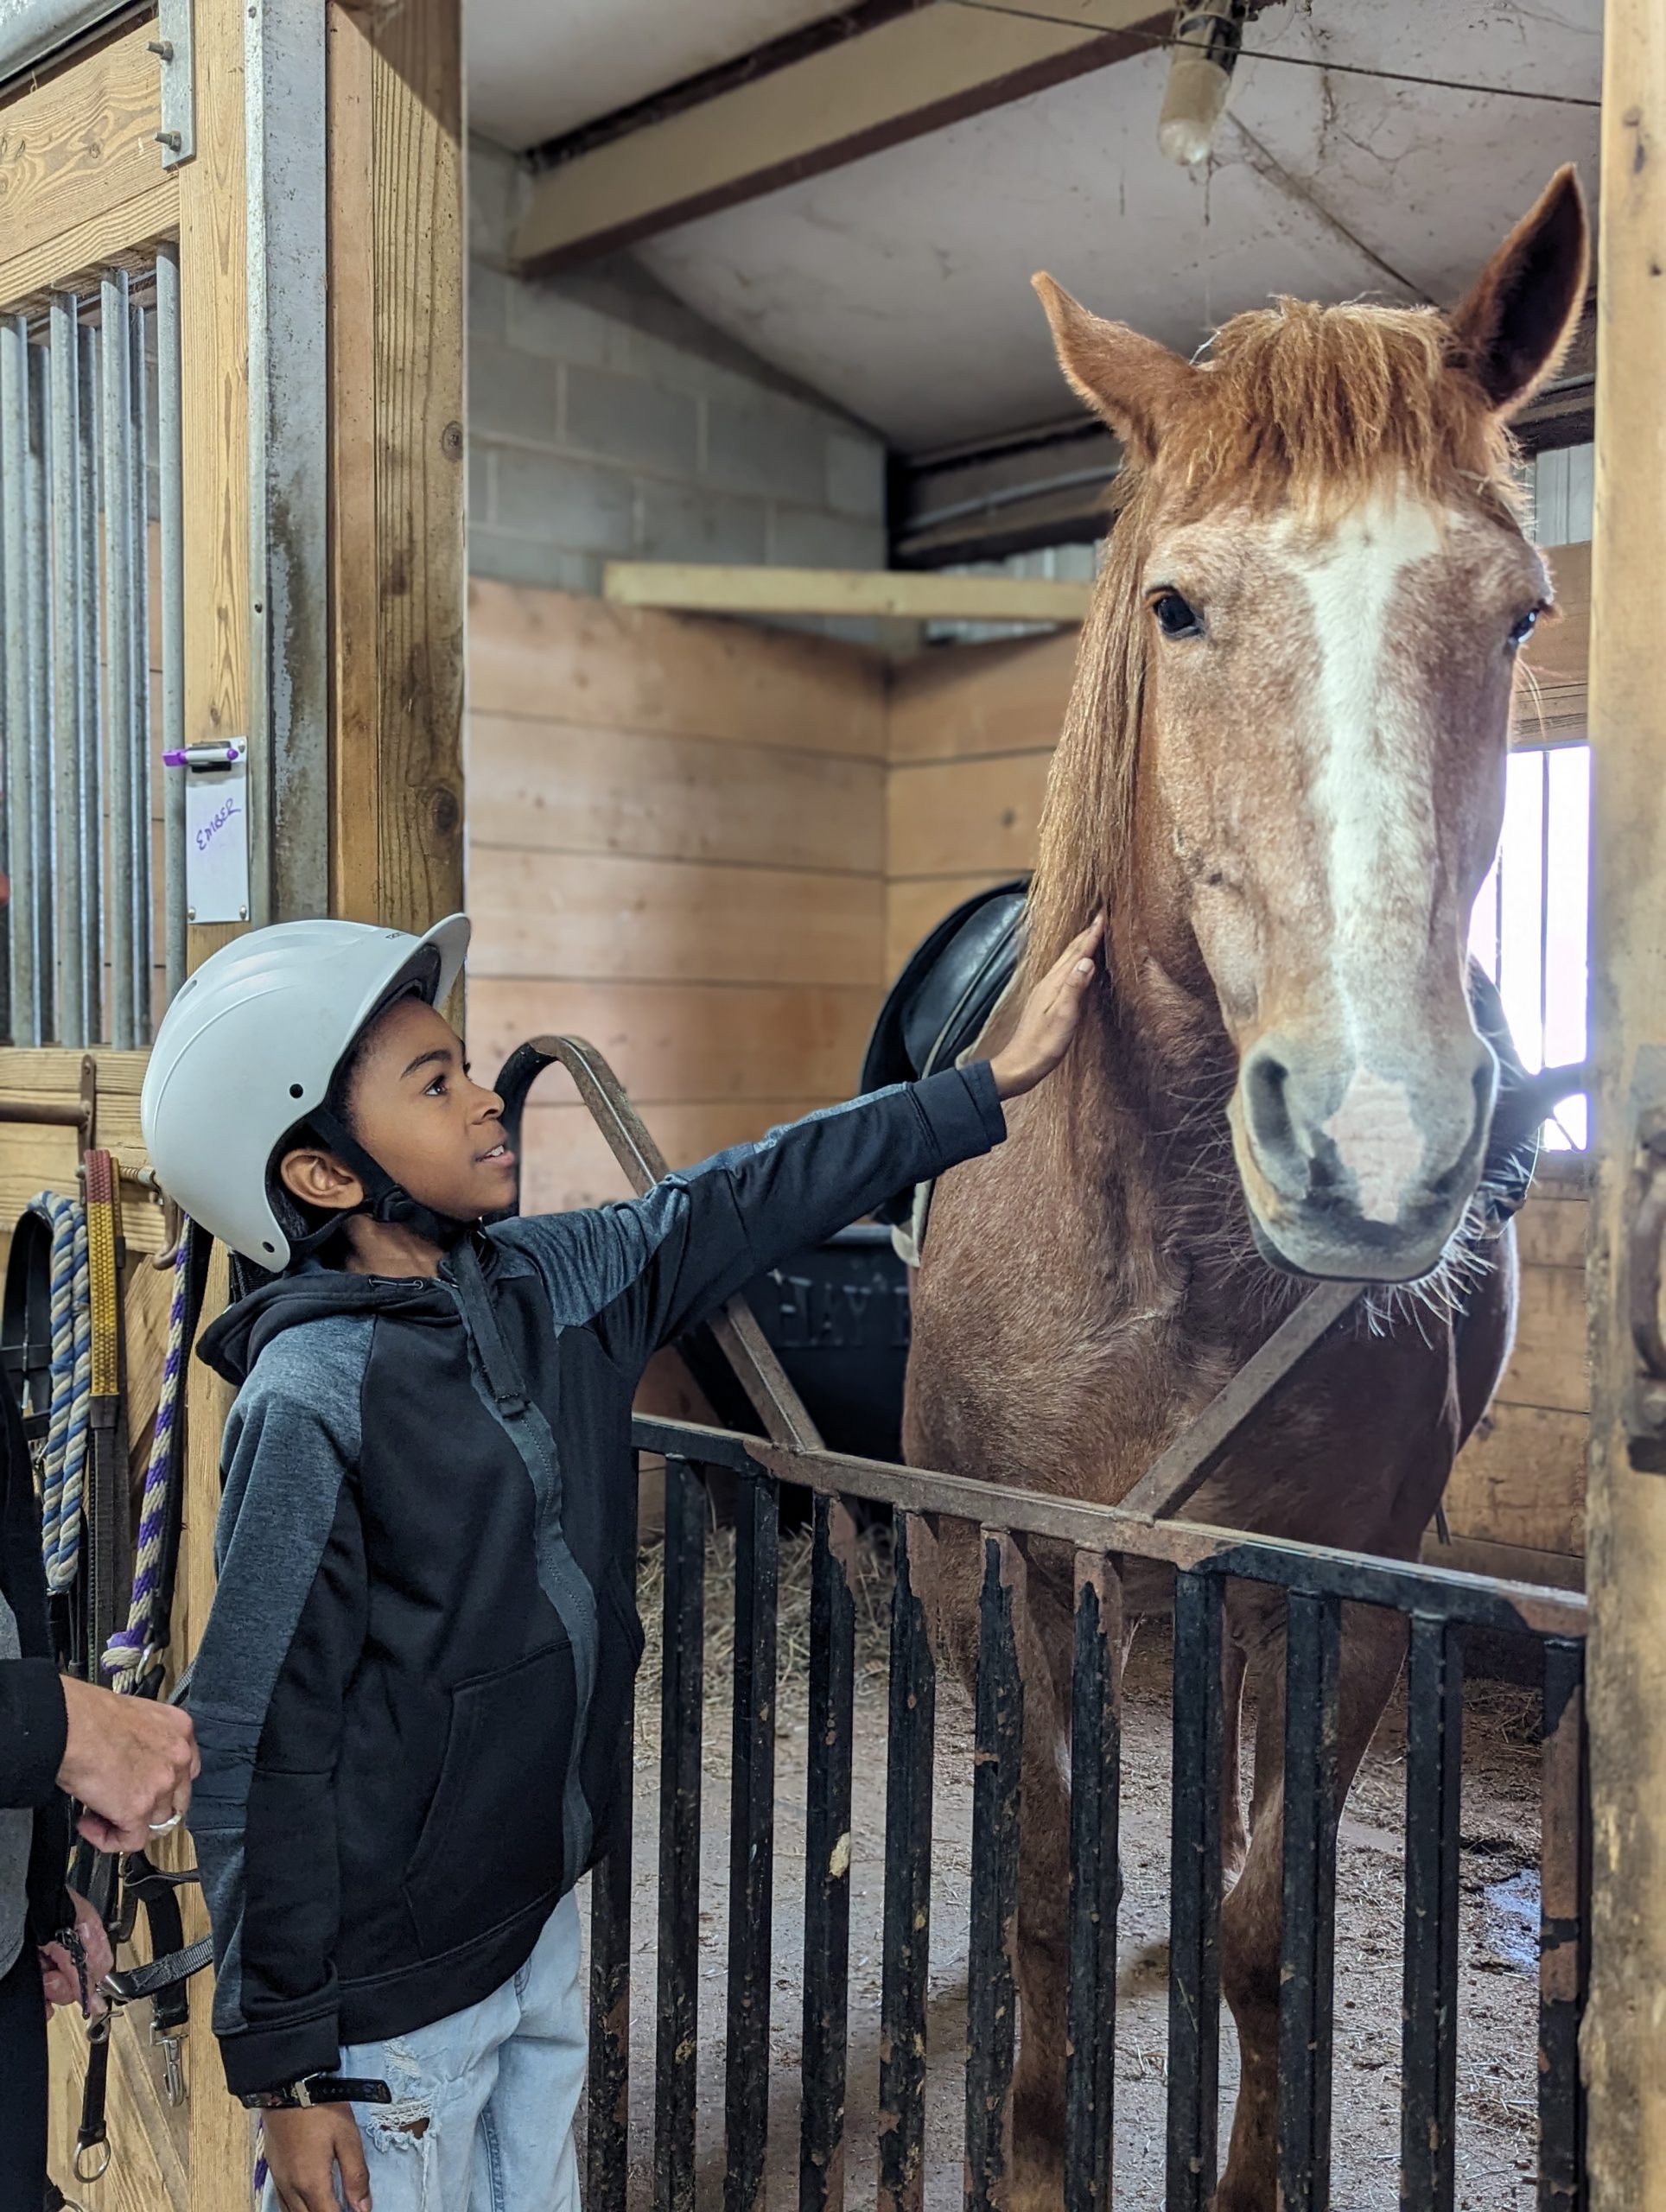 Therapeutic horseback riding restorative, empowering experience for district students